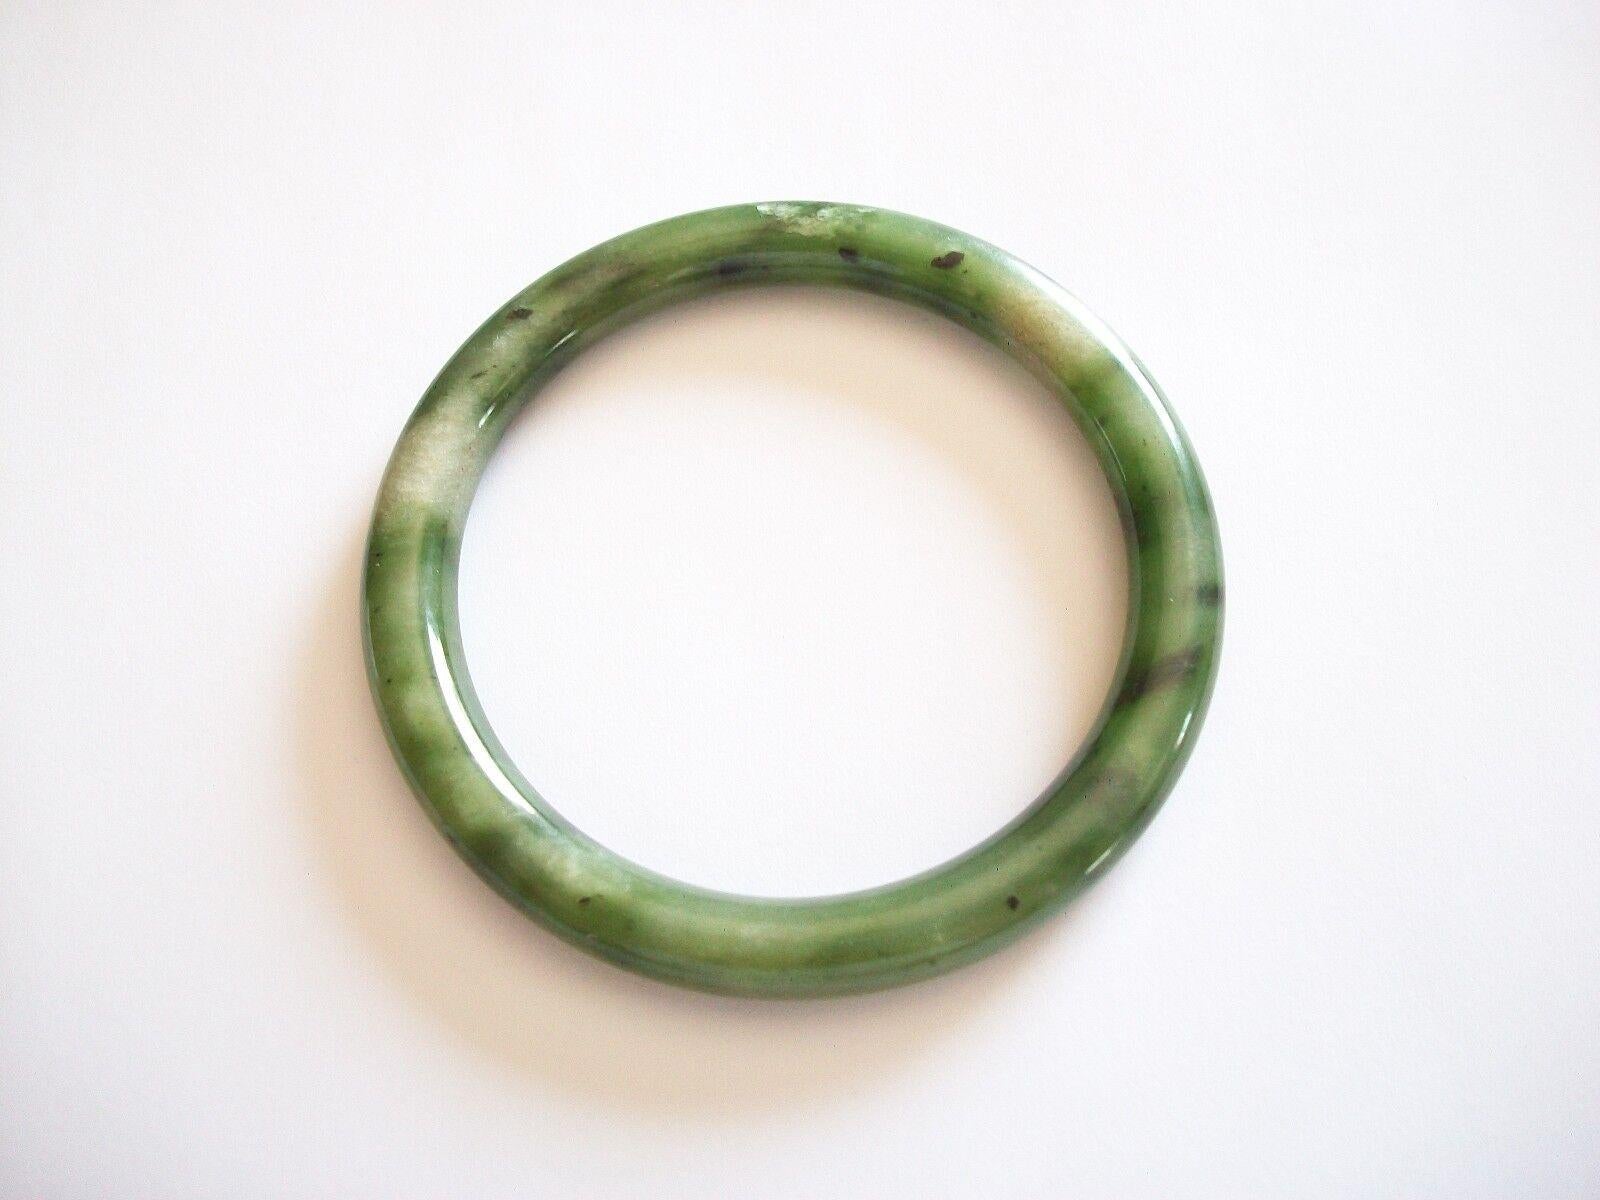 Vintage Chrysoprase quartz bangle - semi translucent - mid 20th century.

Excellent/mint vintage condition - all original - no loss - no damage - no repairs - minor signs of age and use - ready to wear.

Size/Dimensions - Medium - 3 1/8